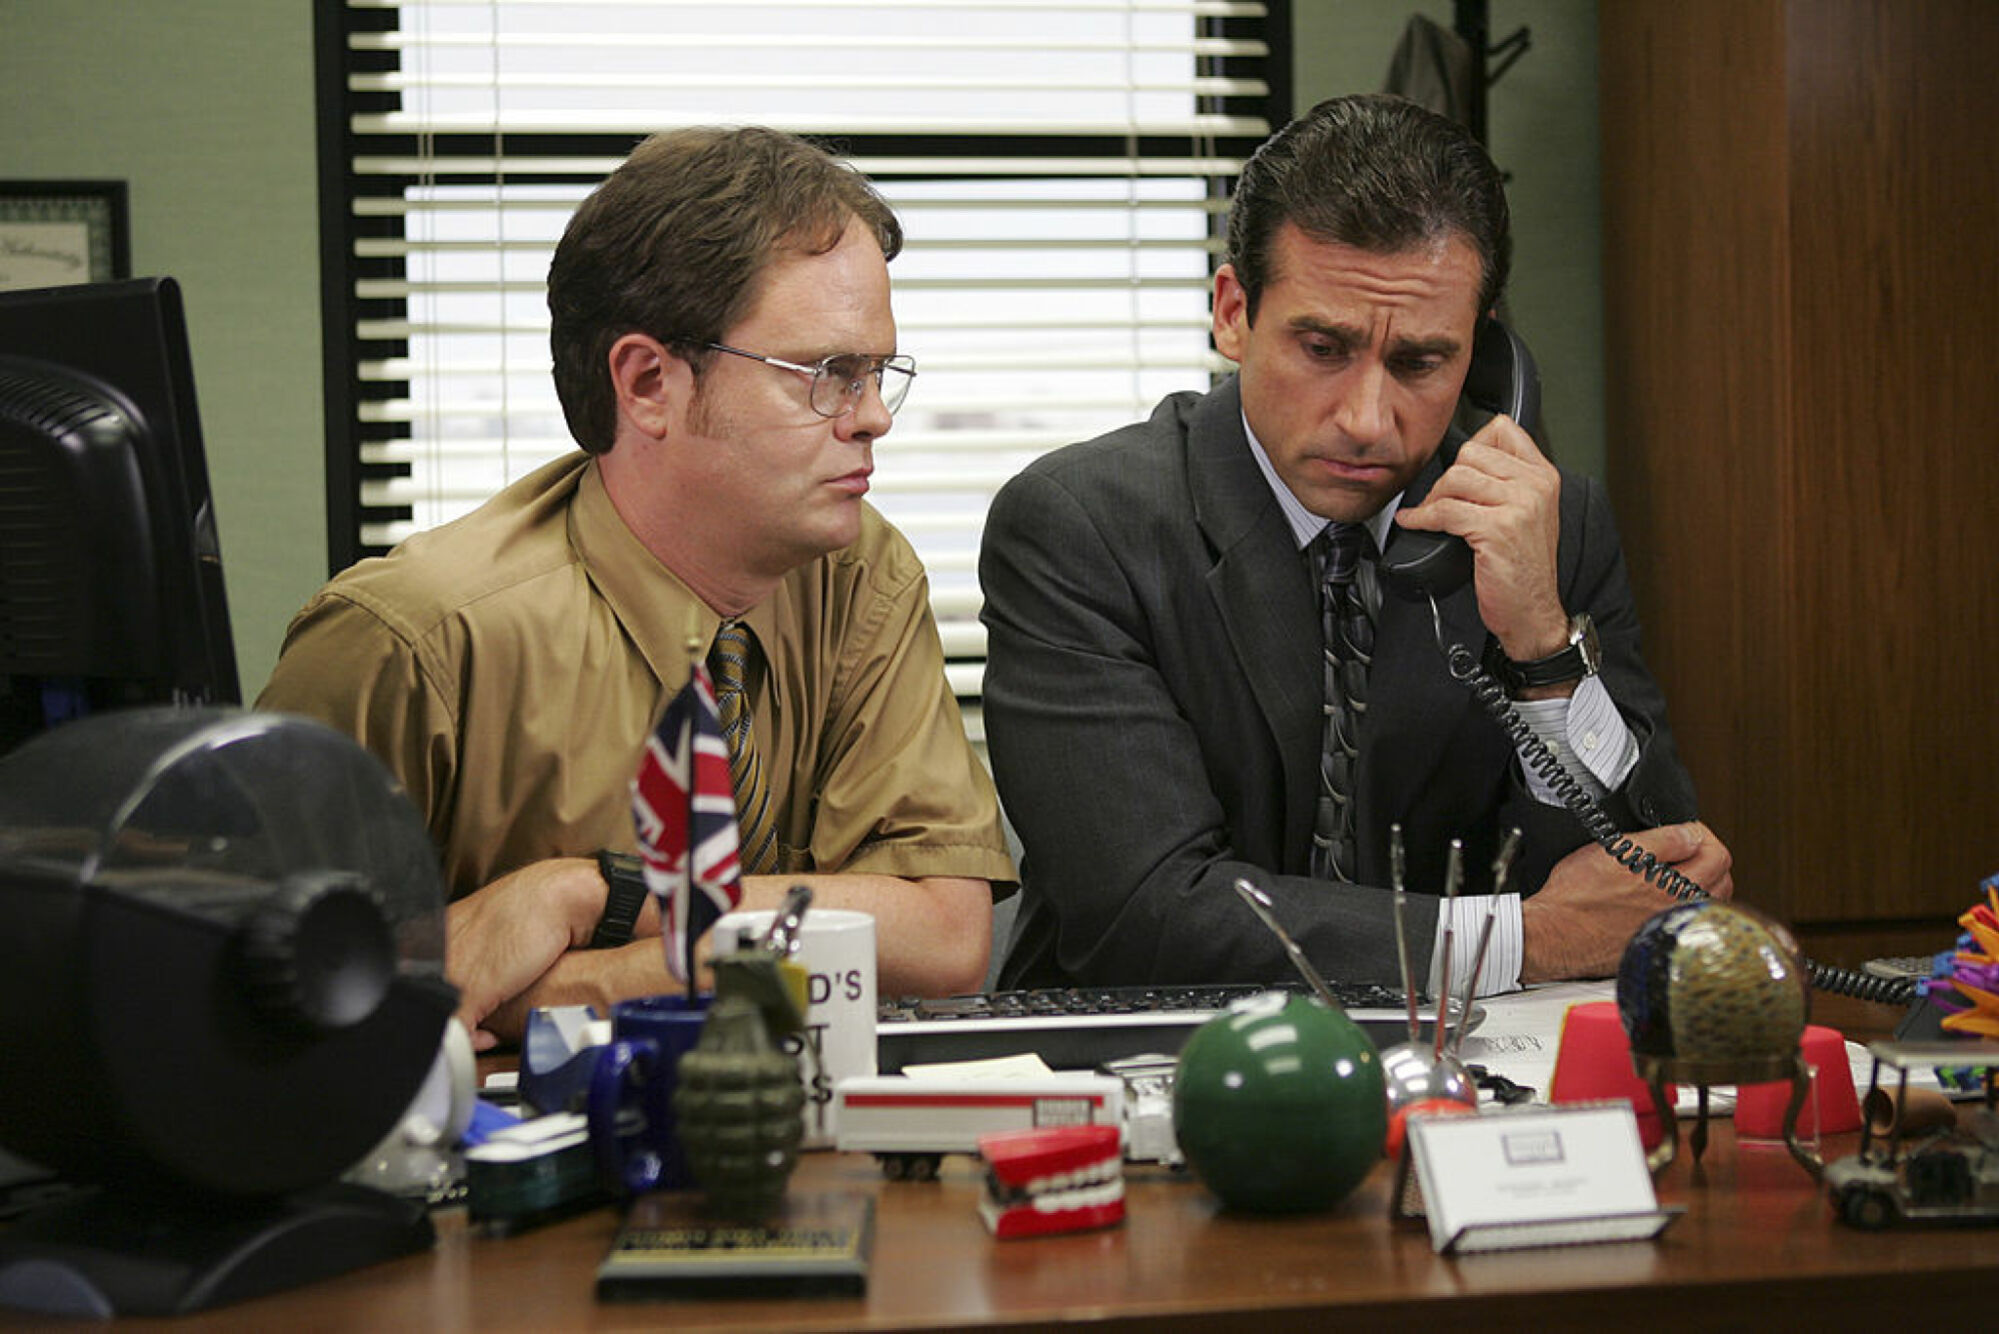 Dwight and Michael take a call.